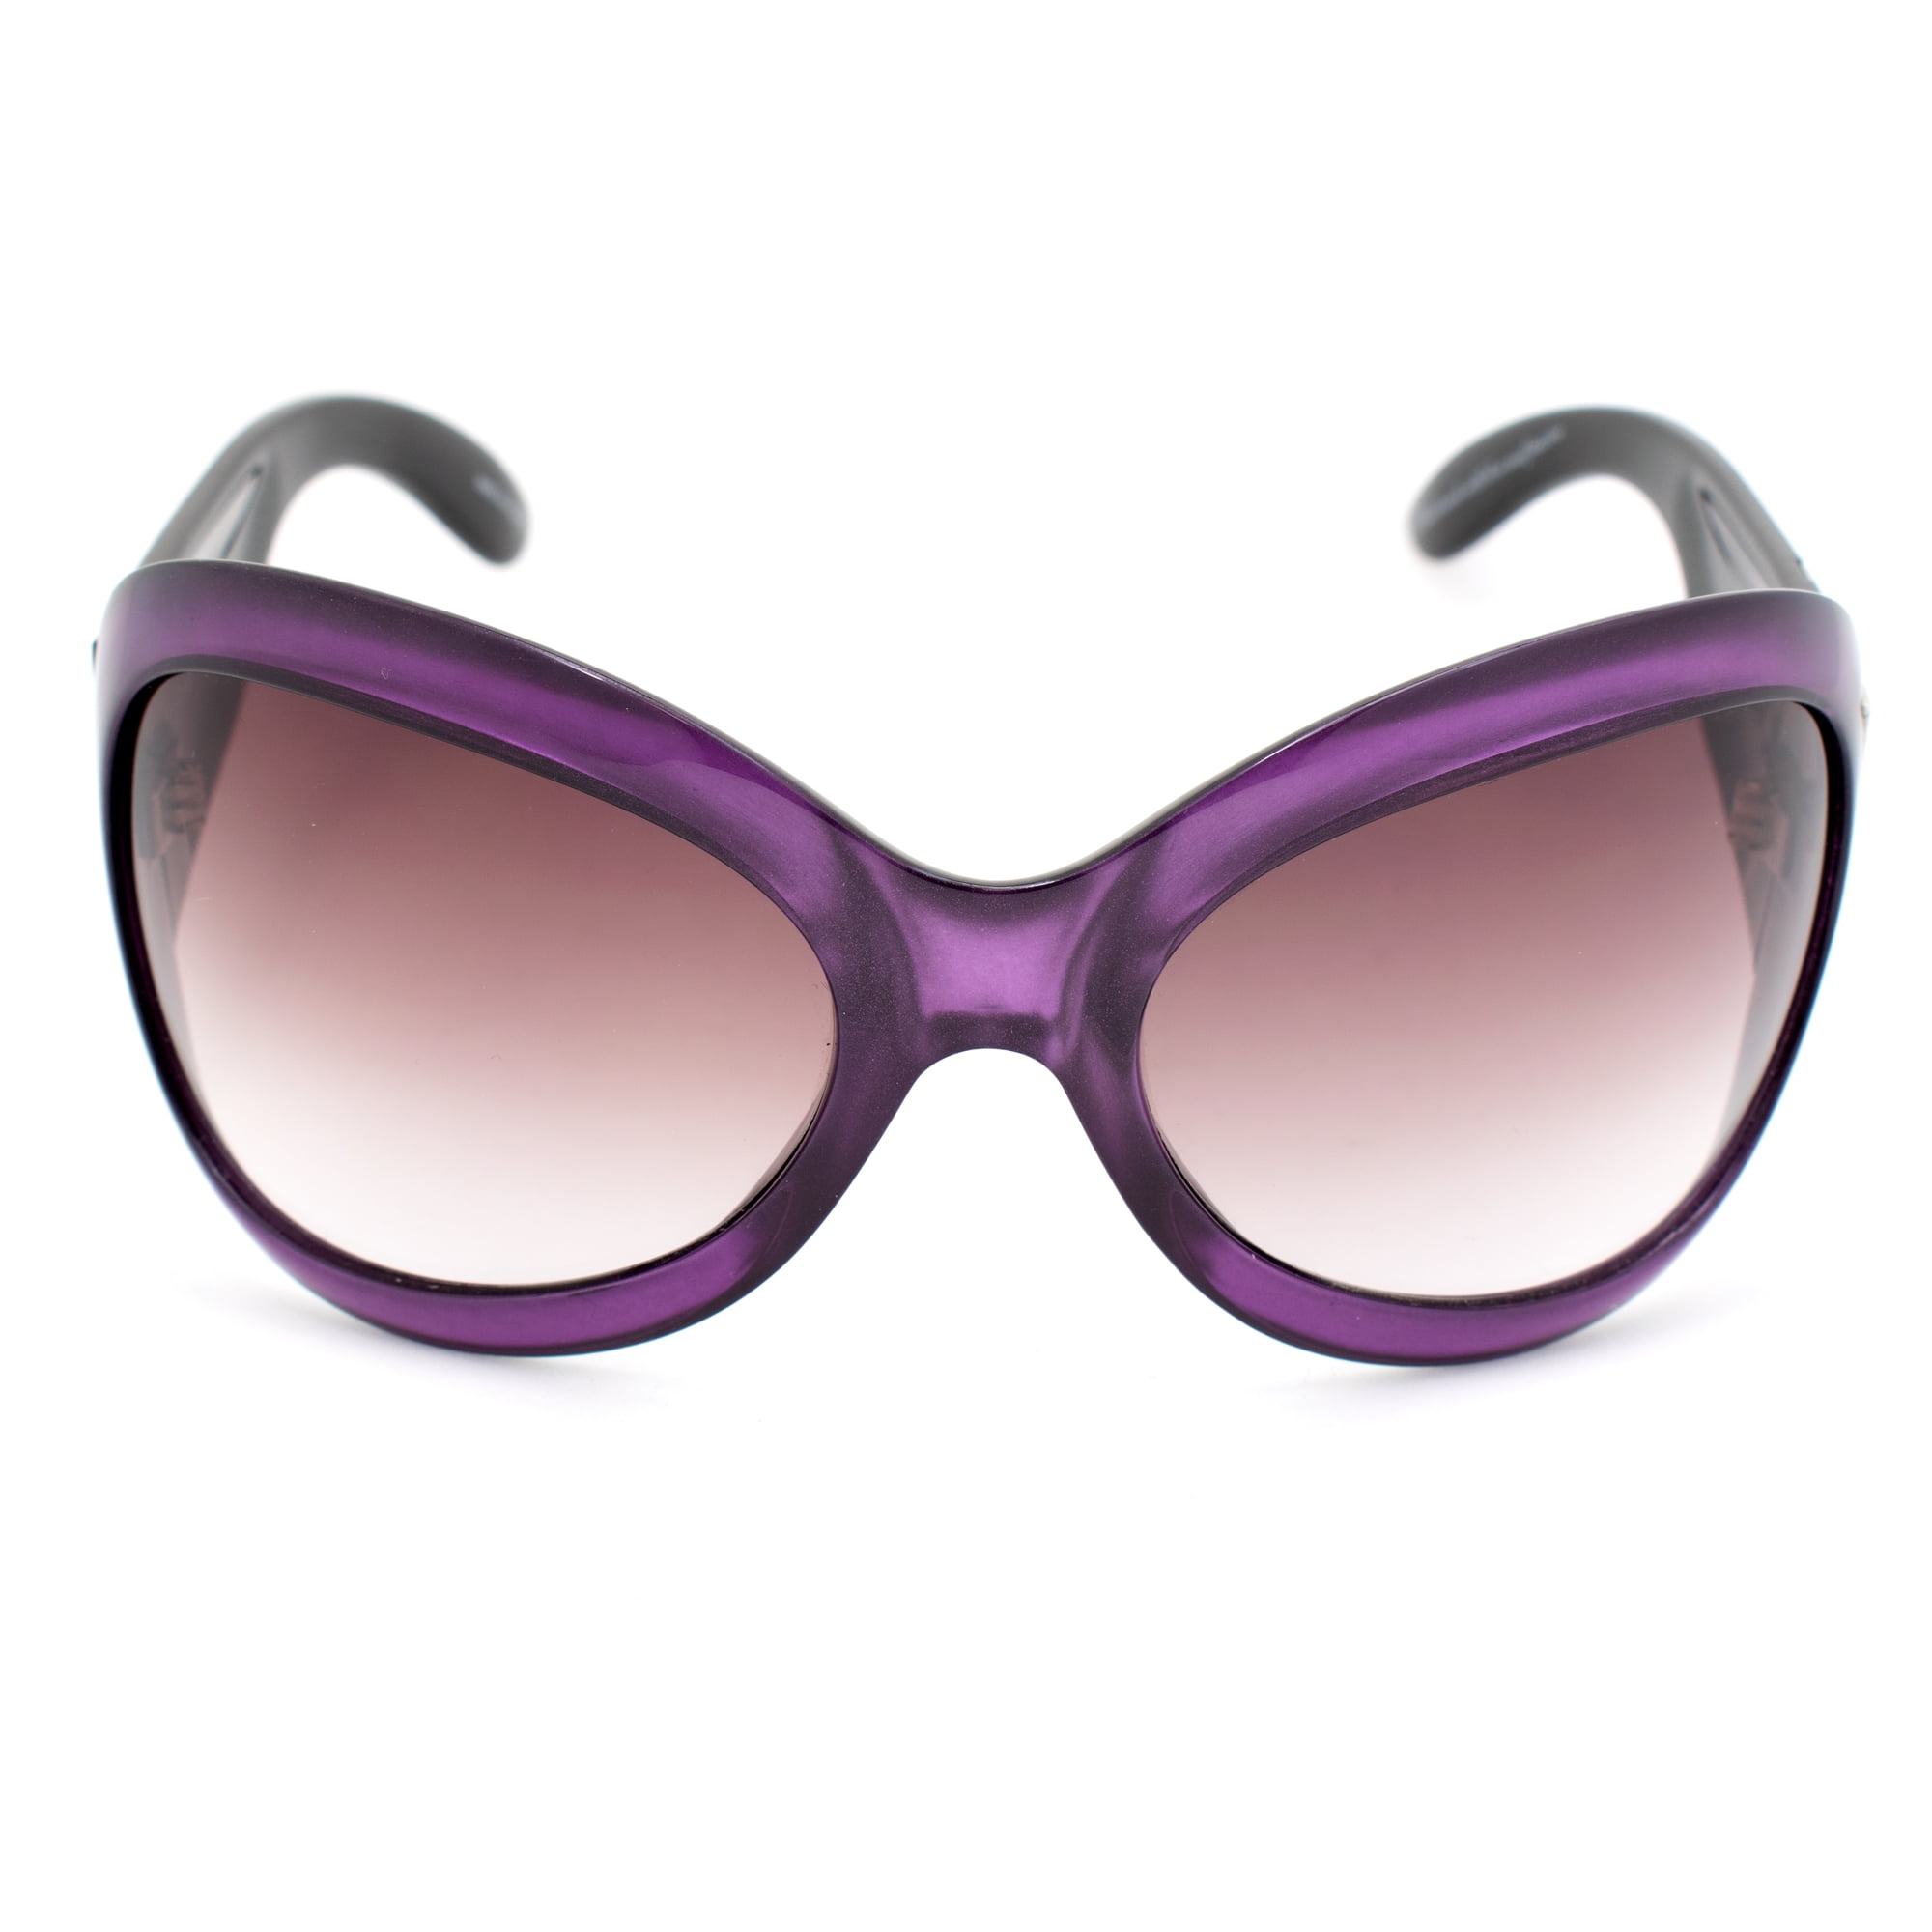 Better  Retro Inspired Glasses by JeeVice